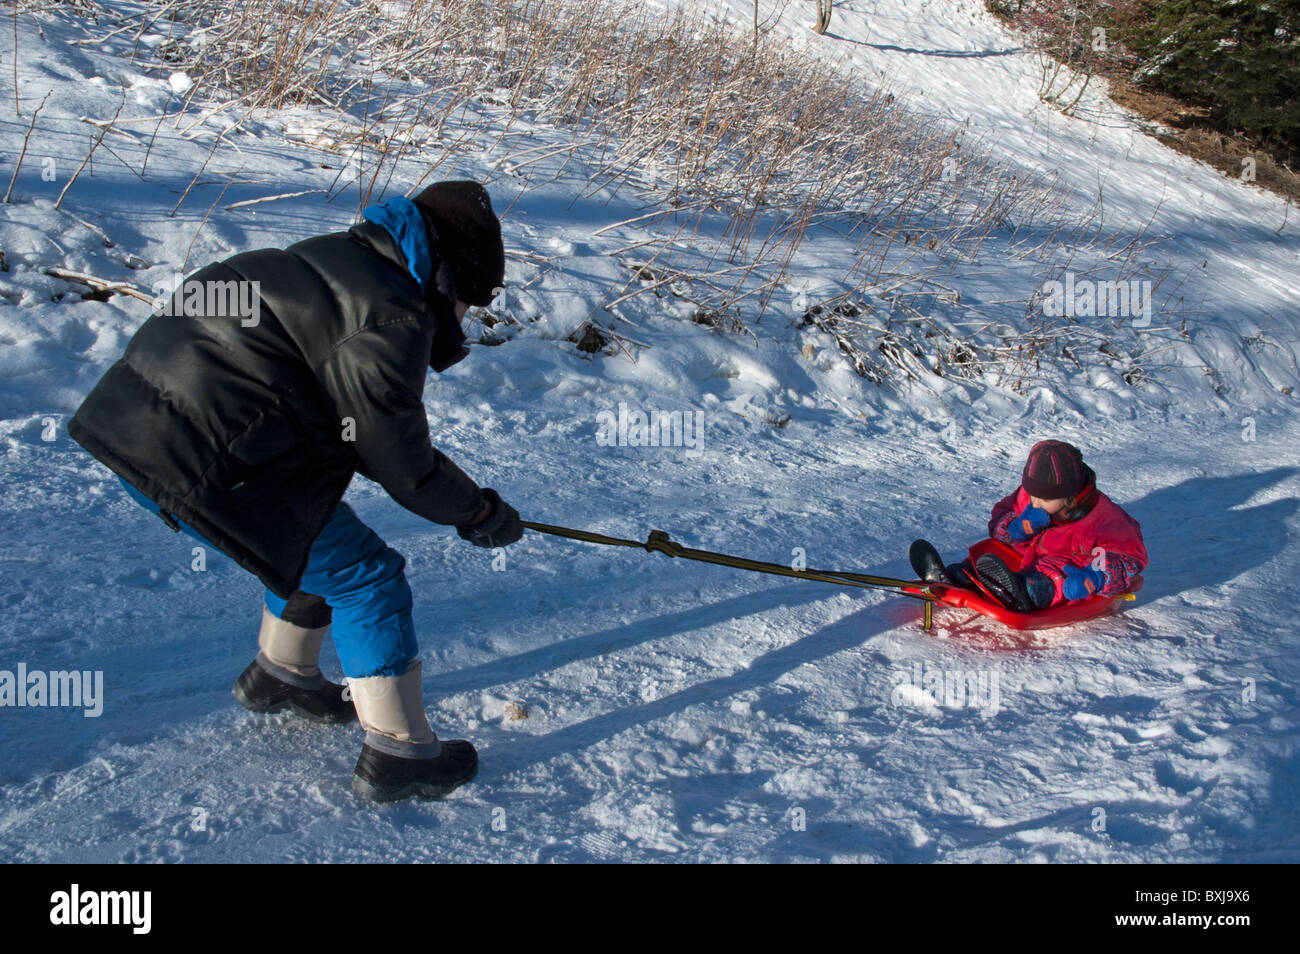 A boy pulling a little girl along on a sled on a snowy path. Stock Photo